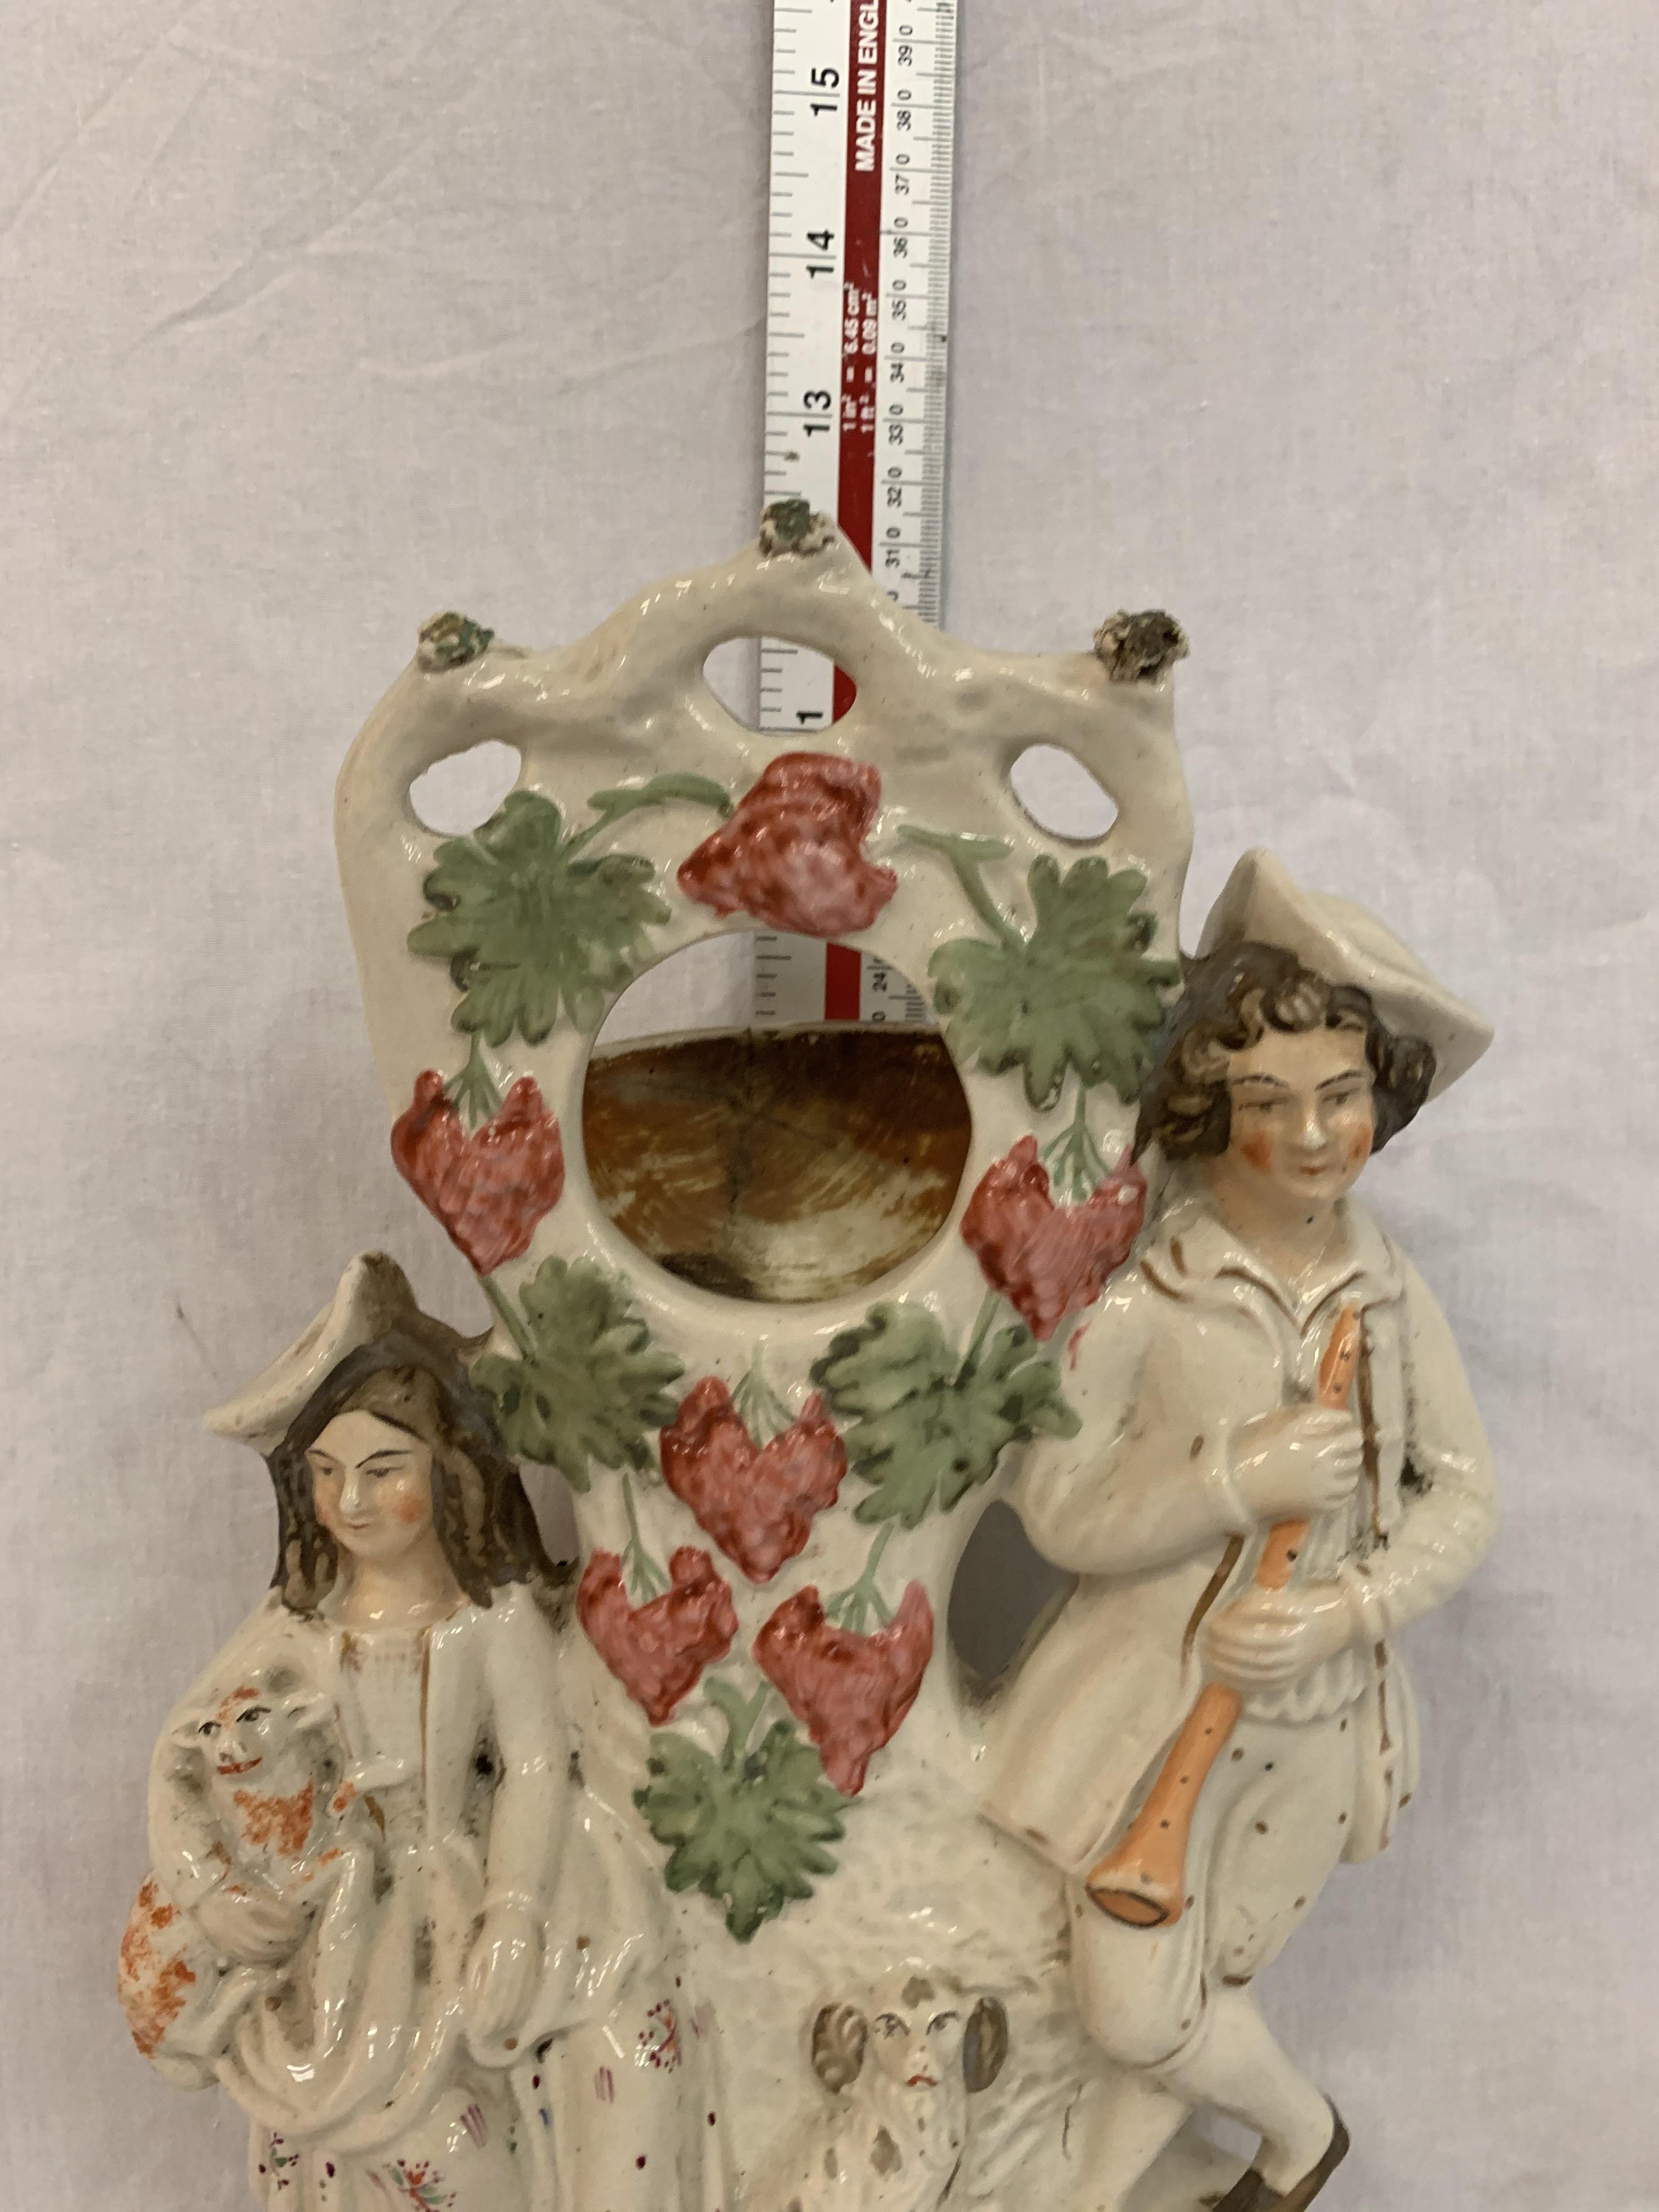 A STAFFORDSHIRE CERAMIC FIGURE OF A LADY AND GENT WITH SPANIEL POCKET WATCH STAND - Image 2 of 7